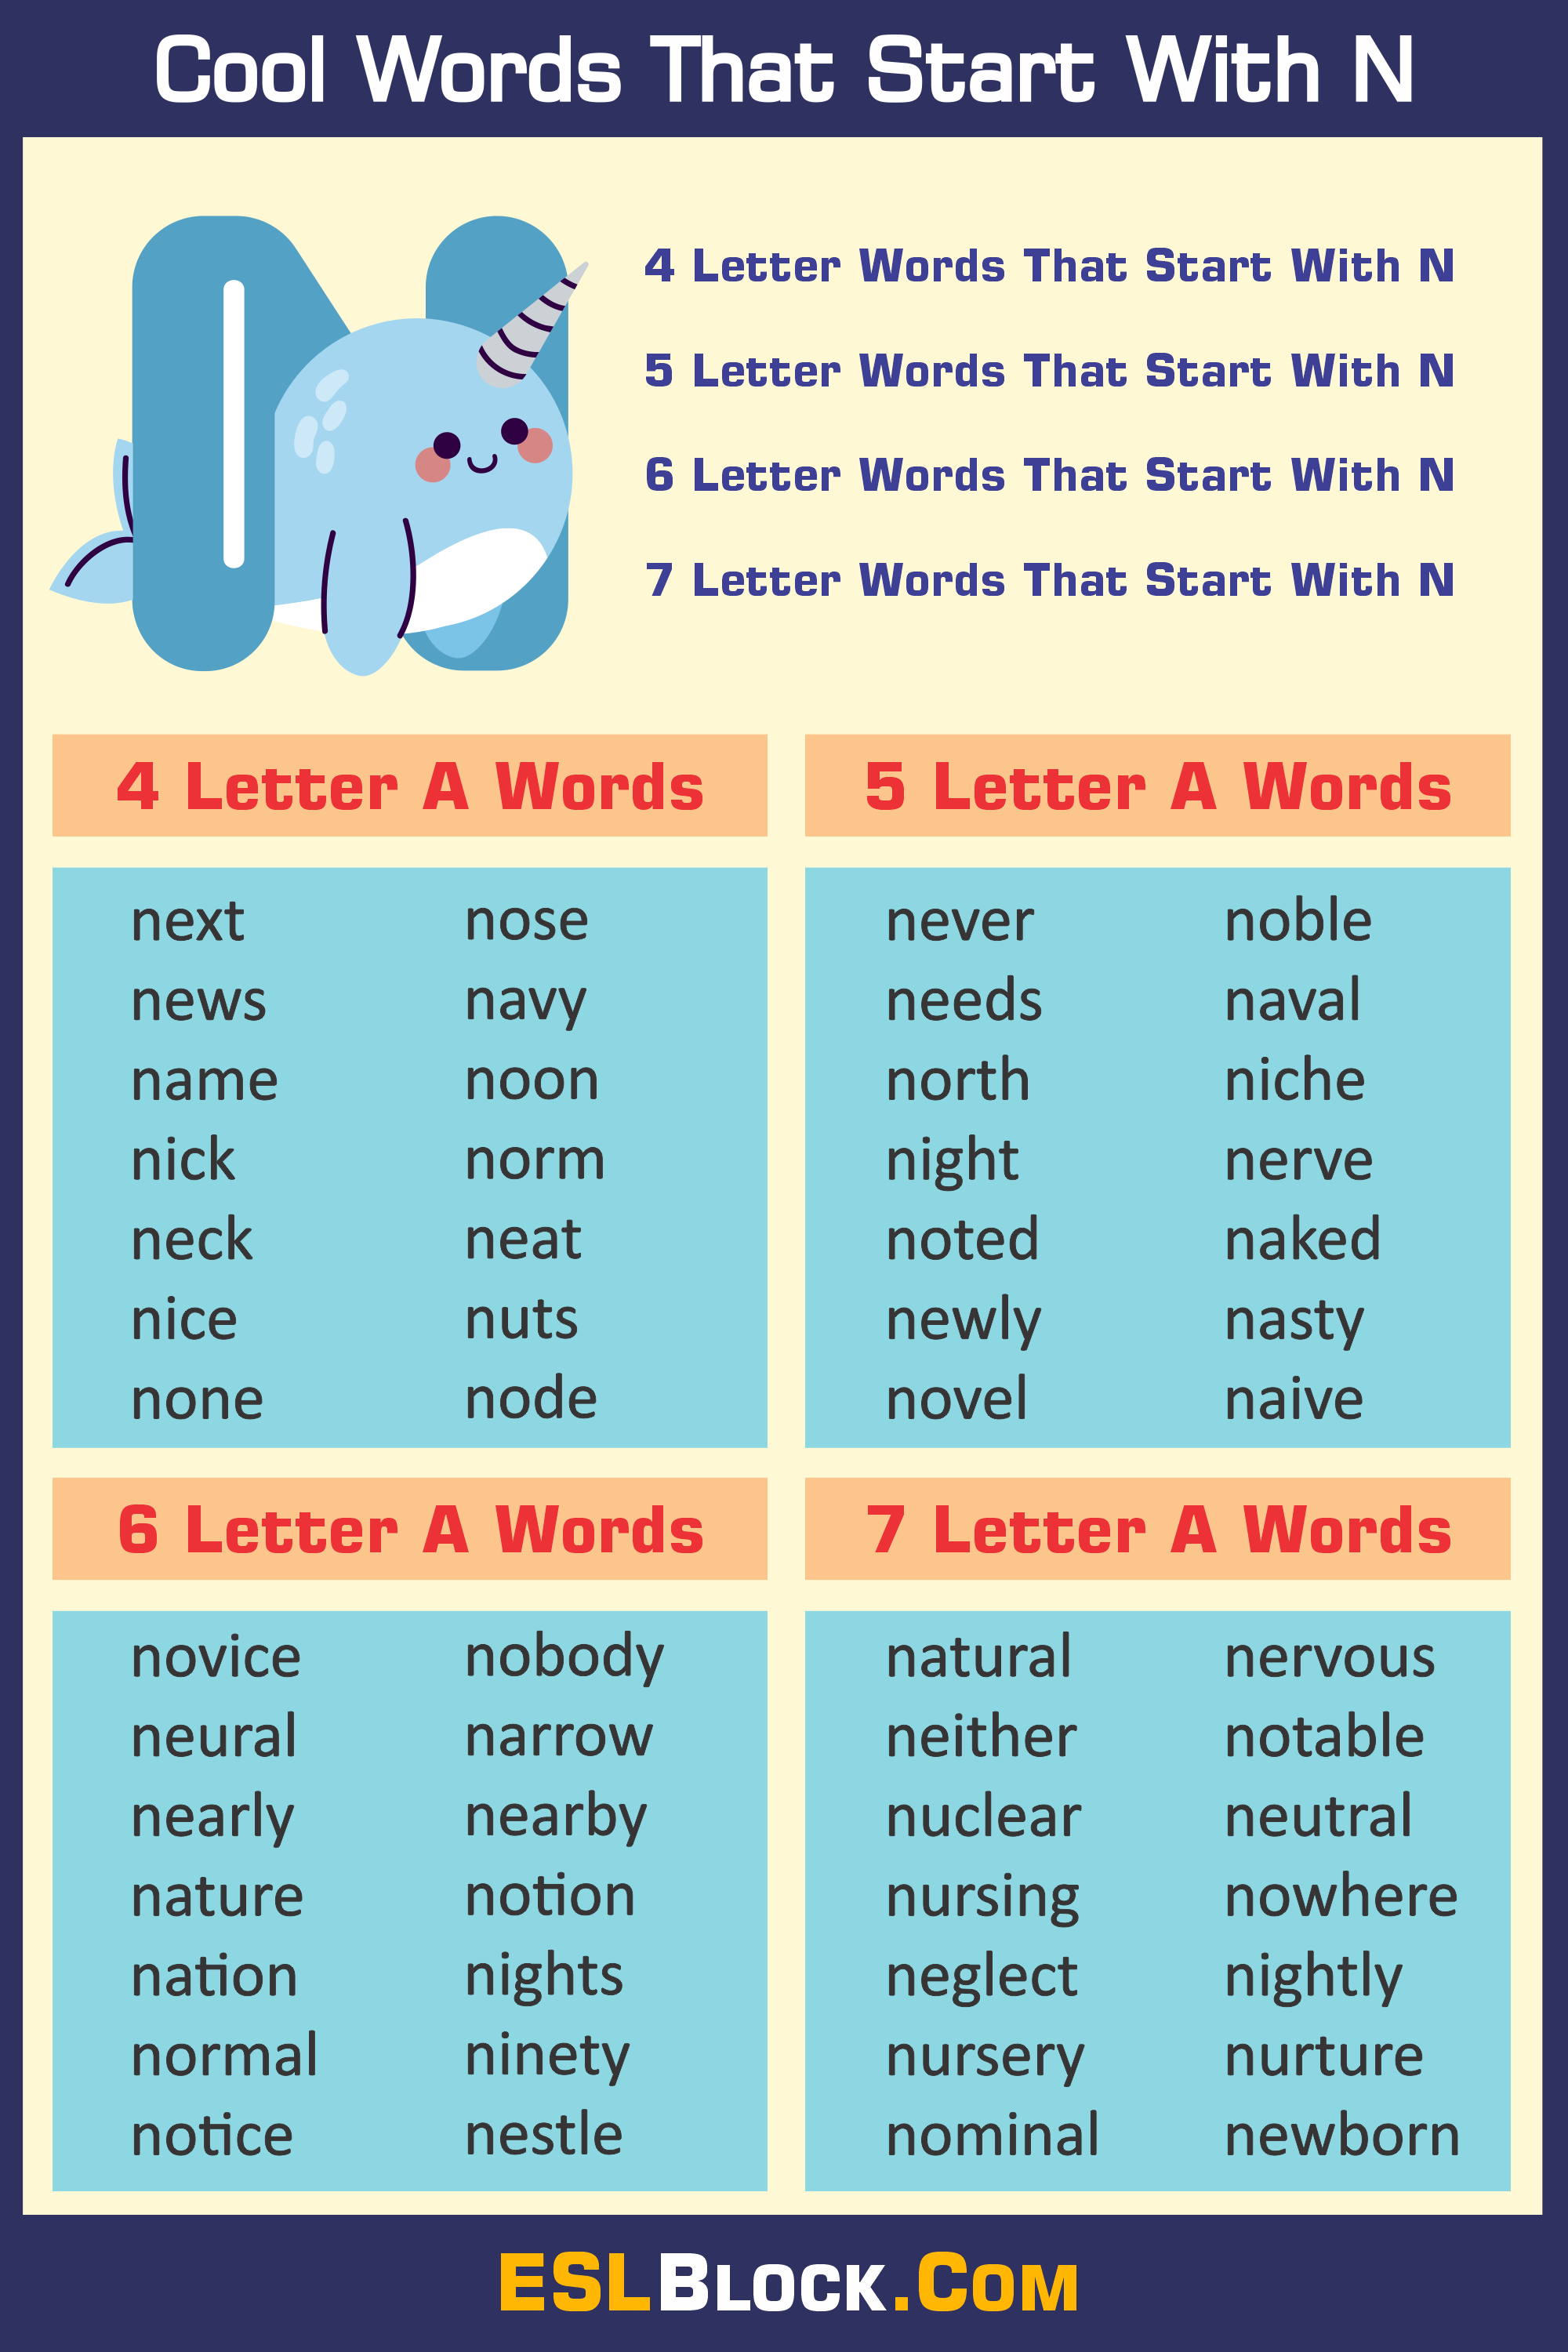 4 Letter Words, 4 Letter Words That Start With N, 5 Letter Words, 5 Letter Words That Start With N, 6 Letter Words, 6 Letter Words That Start With N, 7 Letter Words, 7 Letter Words That Start With N, Awesome Cool Words, Christmas Words That Start With N, Cool Words, Describing Words That Start With N, Descriptive Words That Start With N, English Words, Five Letter Words Starting with N, Good Words That Start With N, N Words, Nice Words That Start With N, Positive Words That Start With N, Unique Words, Word Dictionary, Words That Start With N, Words That Start With N to Describe Someone